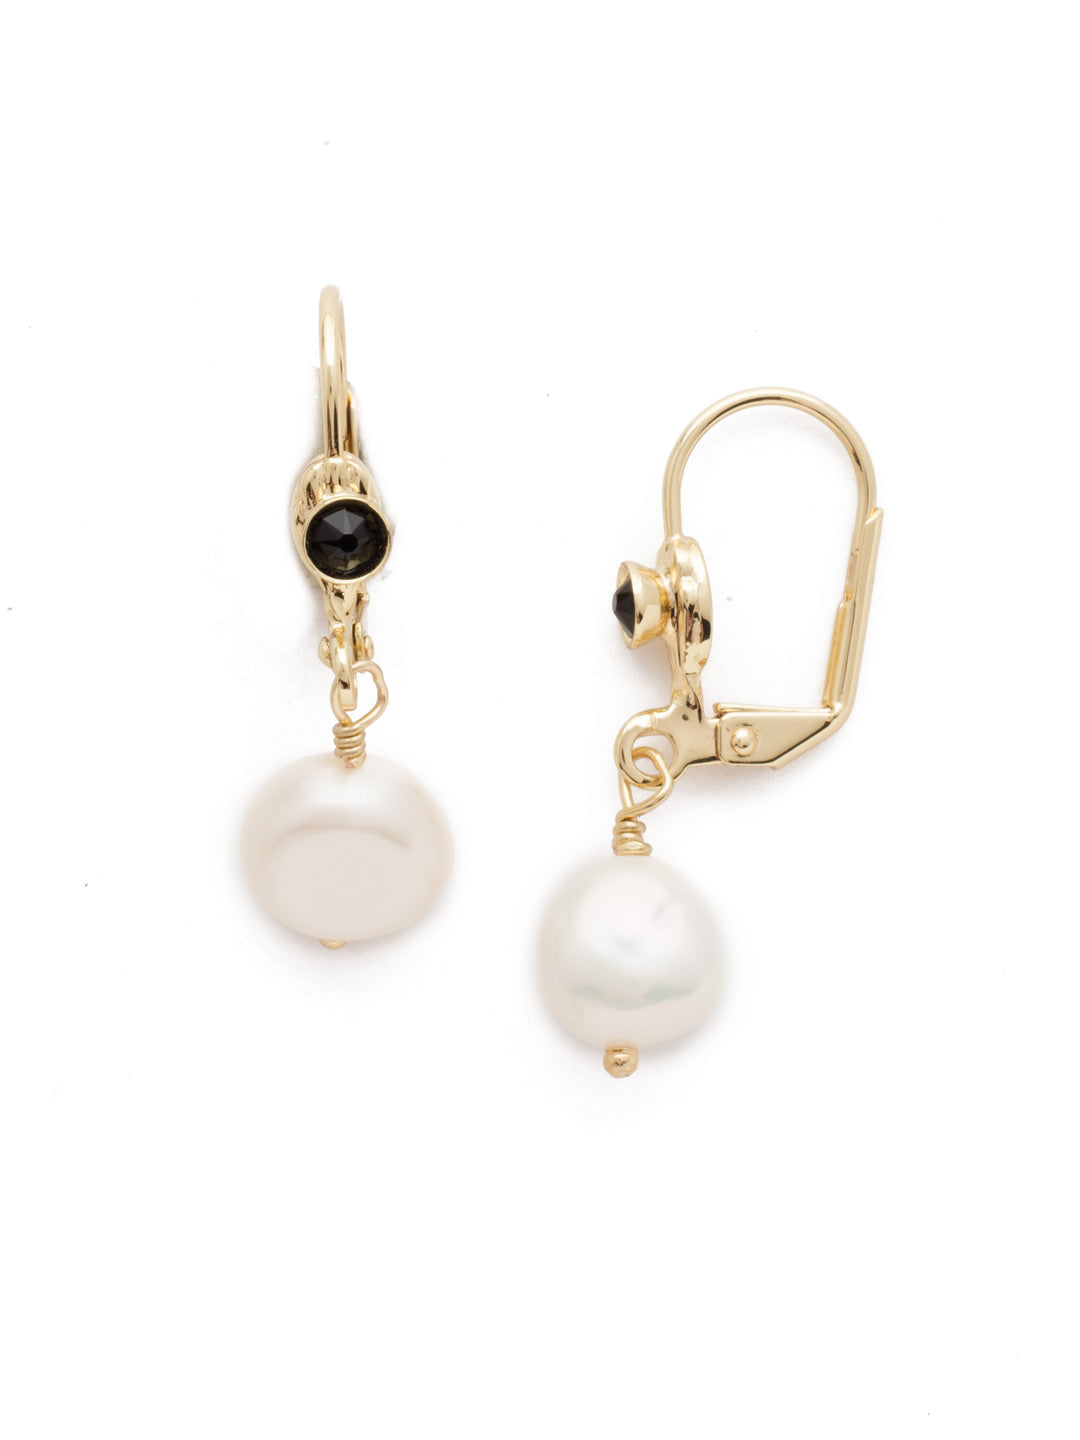 Narelle Dangle Earrings - EEF14BGJET - Anchored on a lever-back post, these luminous pearls dangle from a line of gold atop a brilliant crystal. These dainty earrings are perfect for a day in the office or a night on the town. From Sorrelli's Jet collection in our Bright Gold-tone finish.